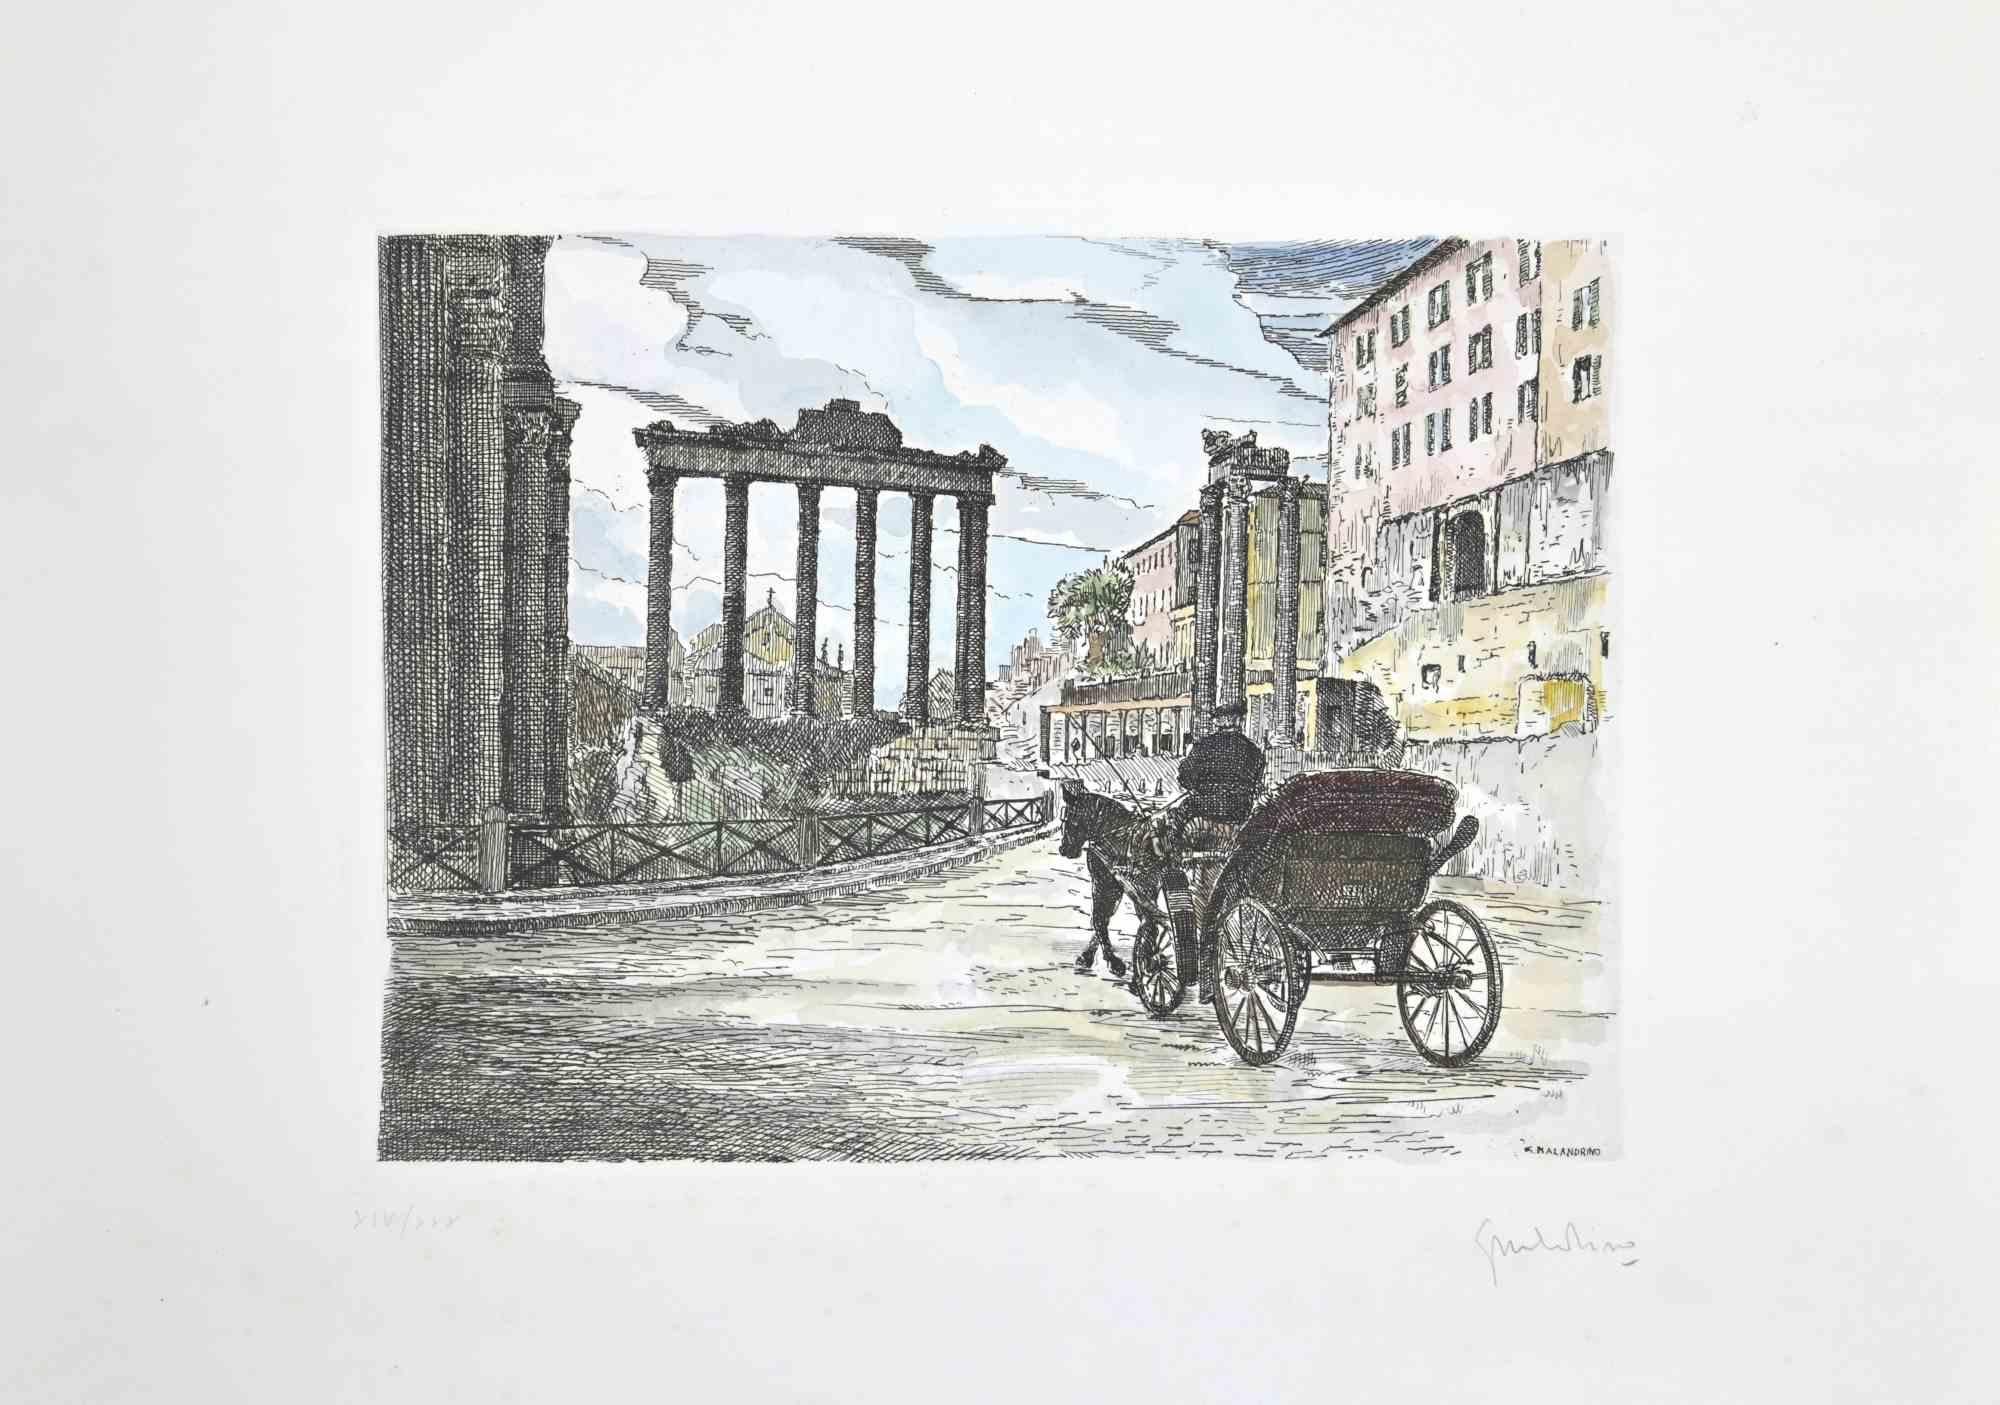 Roman Forum is an artwork realized by Giuseppe Malandrino.

Print in etching technique and hand watercolored.

Hand-signed by the artist in pencil on the lower right corner.

Numbered edition of 30 copies.

Good condition.

This artwork represents